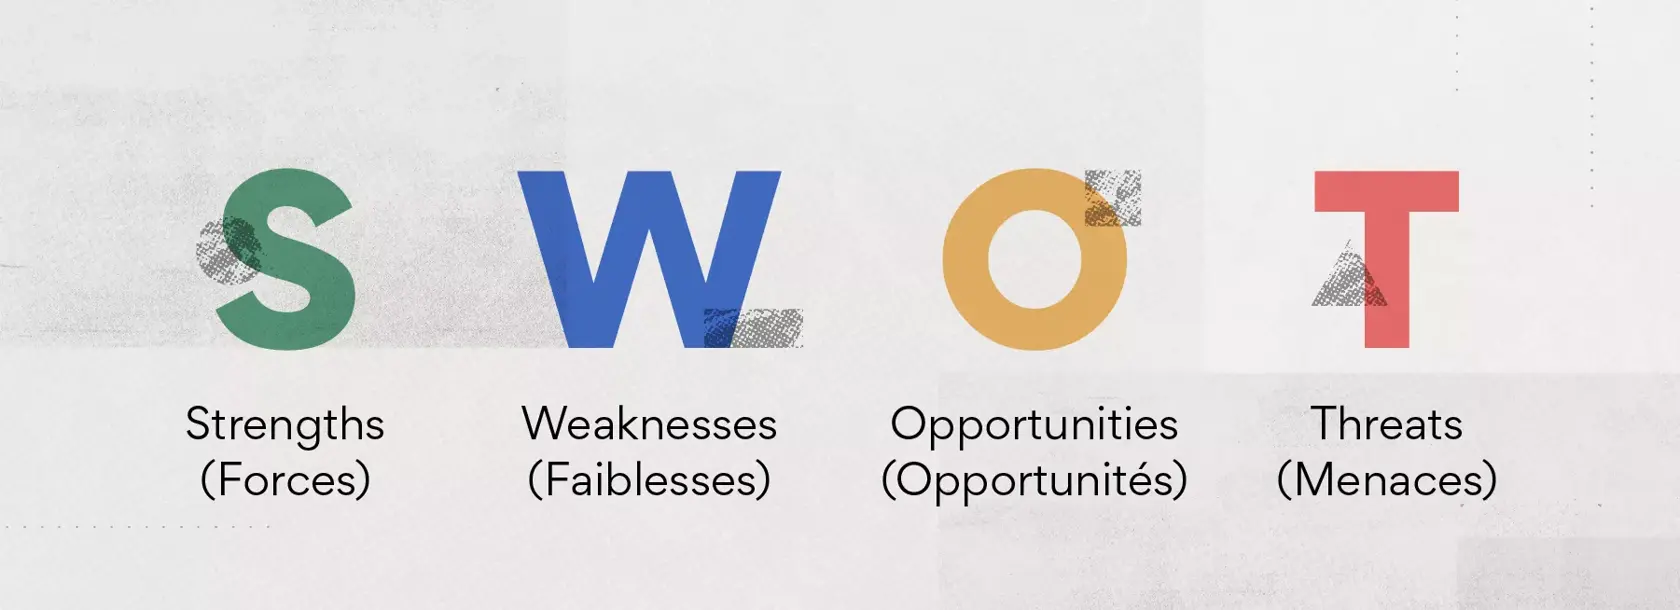 Strengths (forces), weaknesses (faiblesses), opportunities (opportunités), threats (menaces)